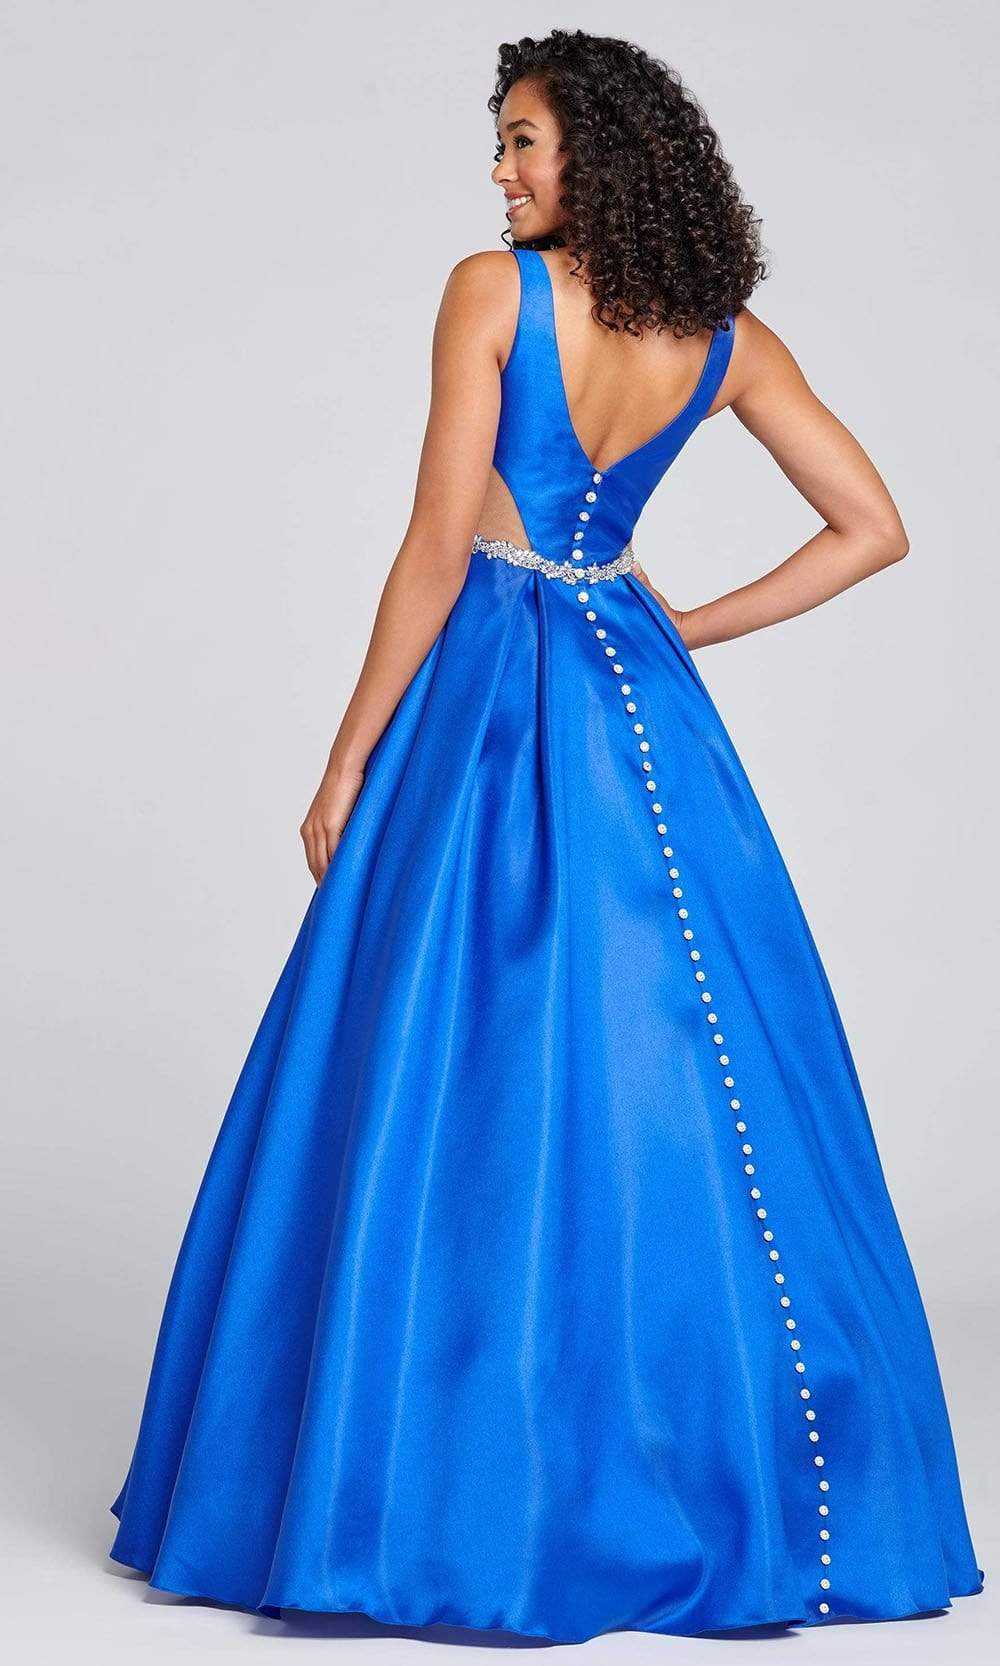 Colette for Mon Cheri, Colette for Mon Cheri - CL12131 Sleek Bejeweled Waist Modest Prom A-Line Gown